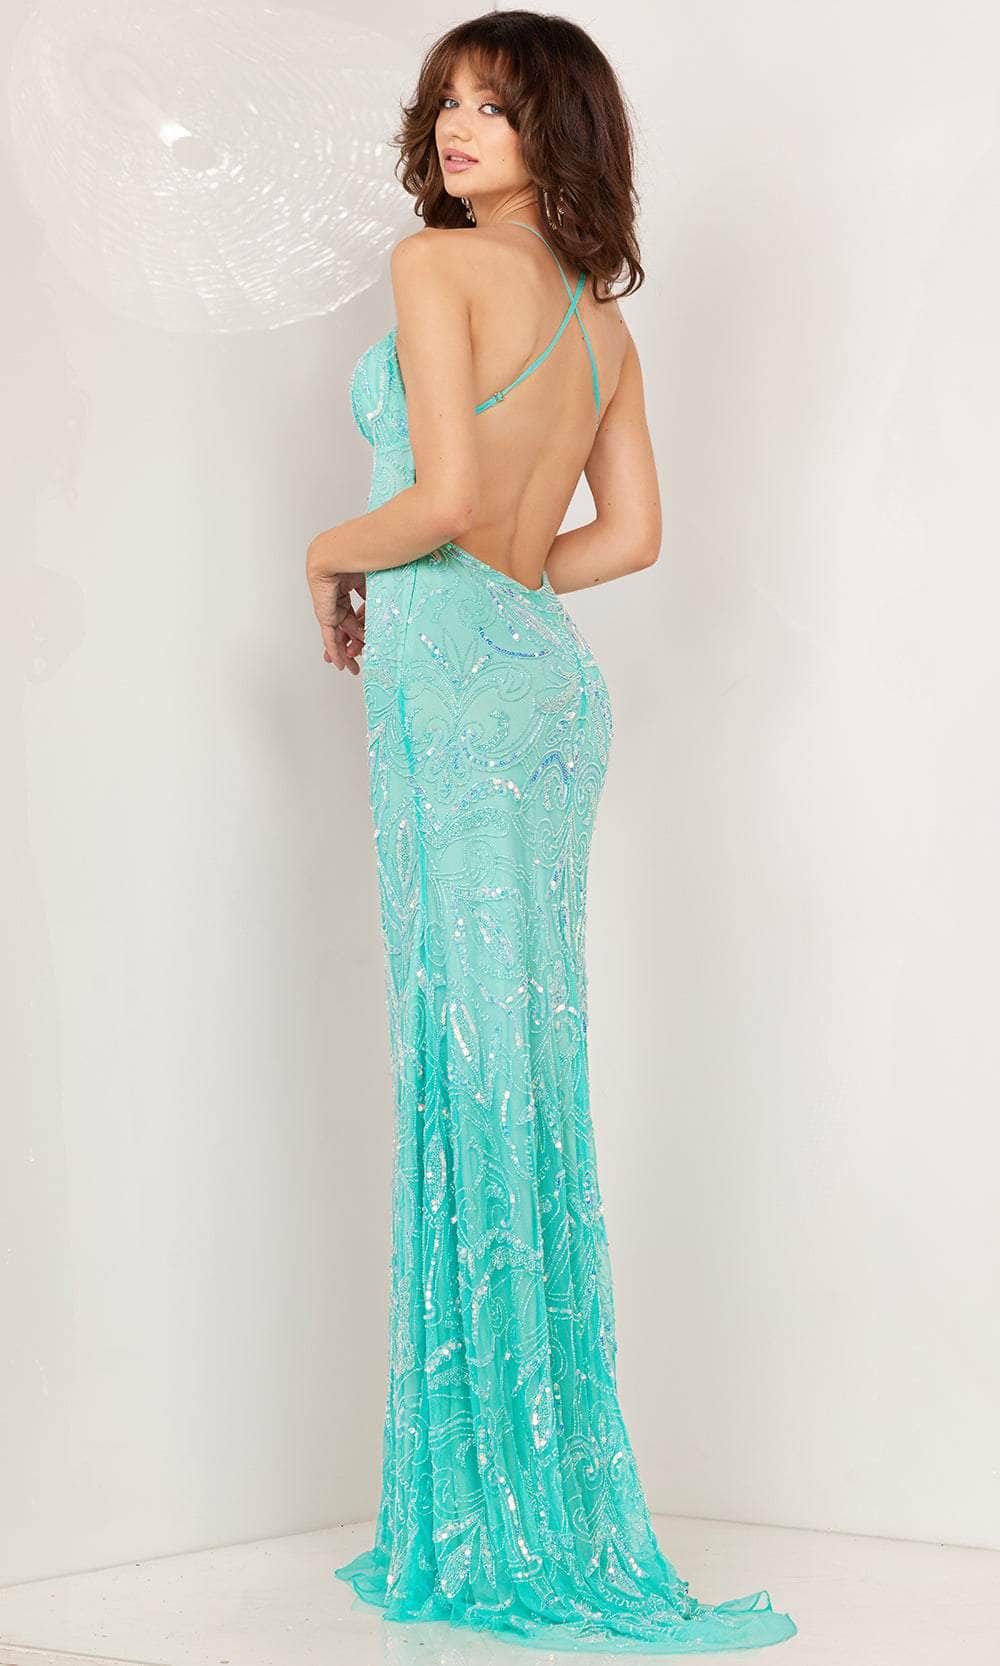 Aleta Couture 196 - Fitted Spaghetti Straps Evening Dress Evening Dresses